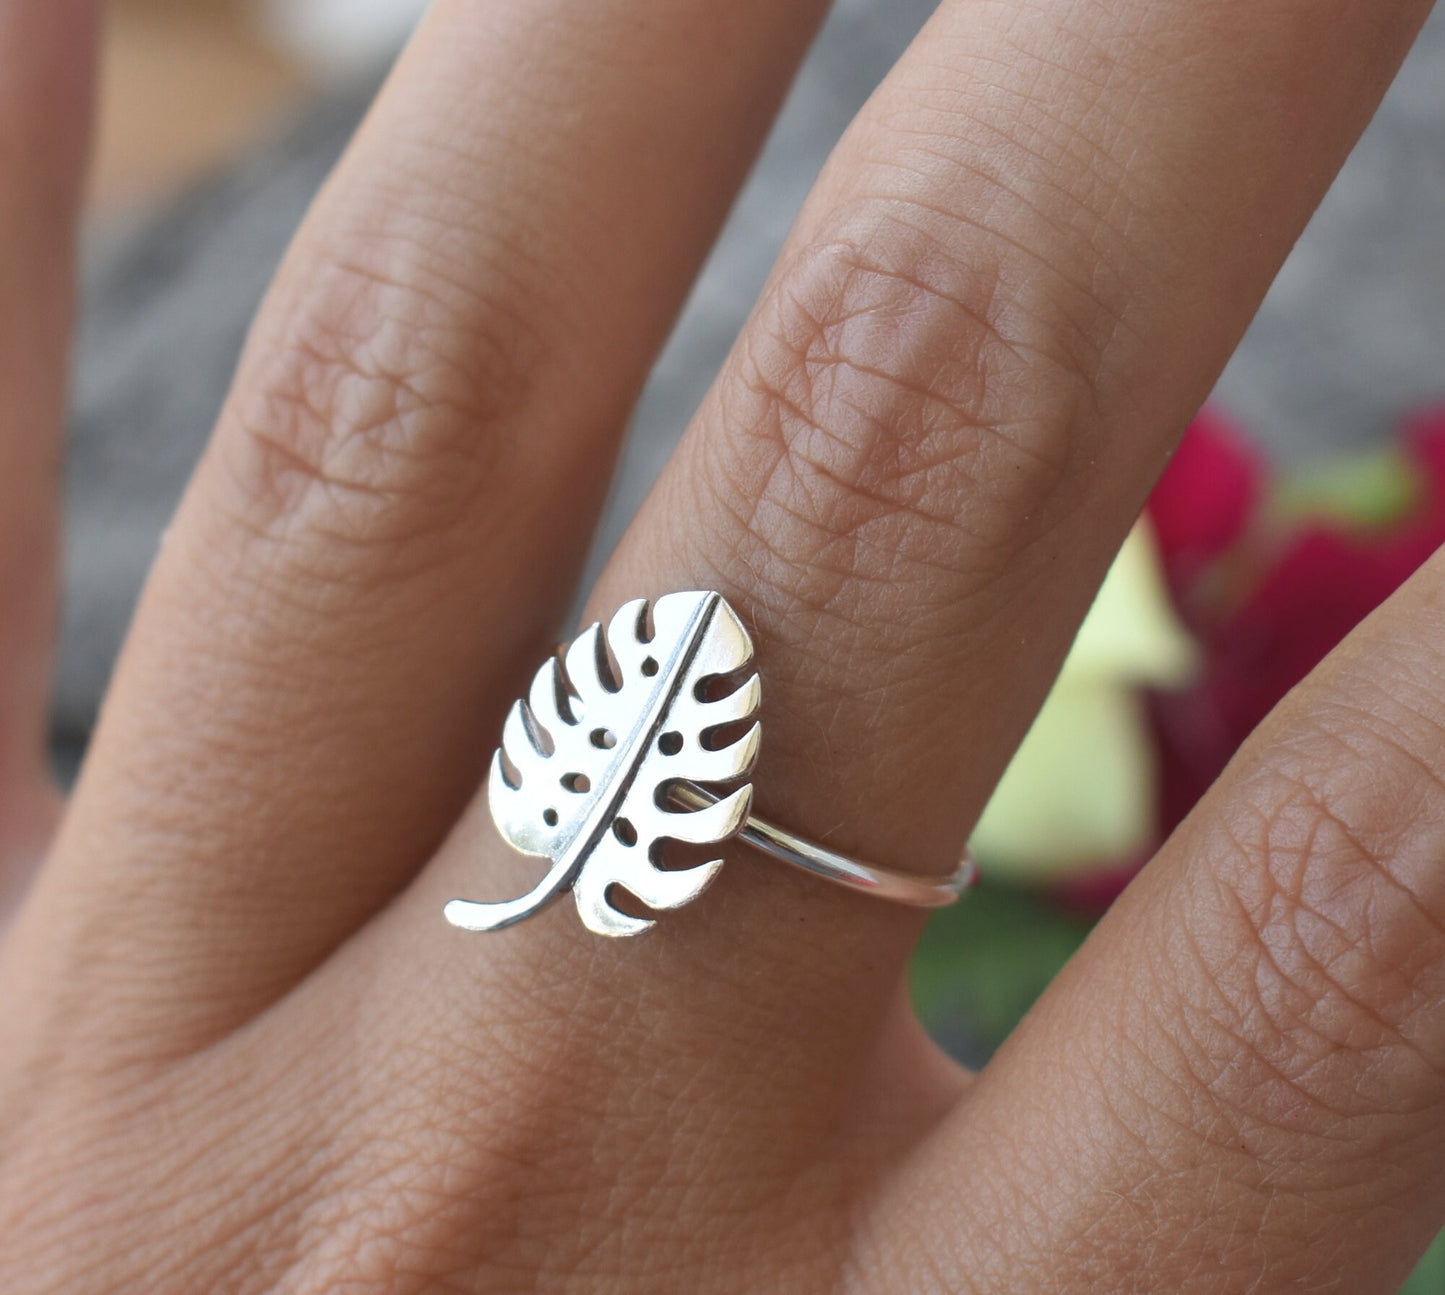 Monstera Ring- Tropical Ring, Plant Lover Ring, Monstera Jewelry-Silver Monstera Ring